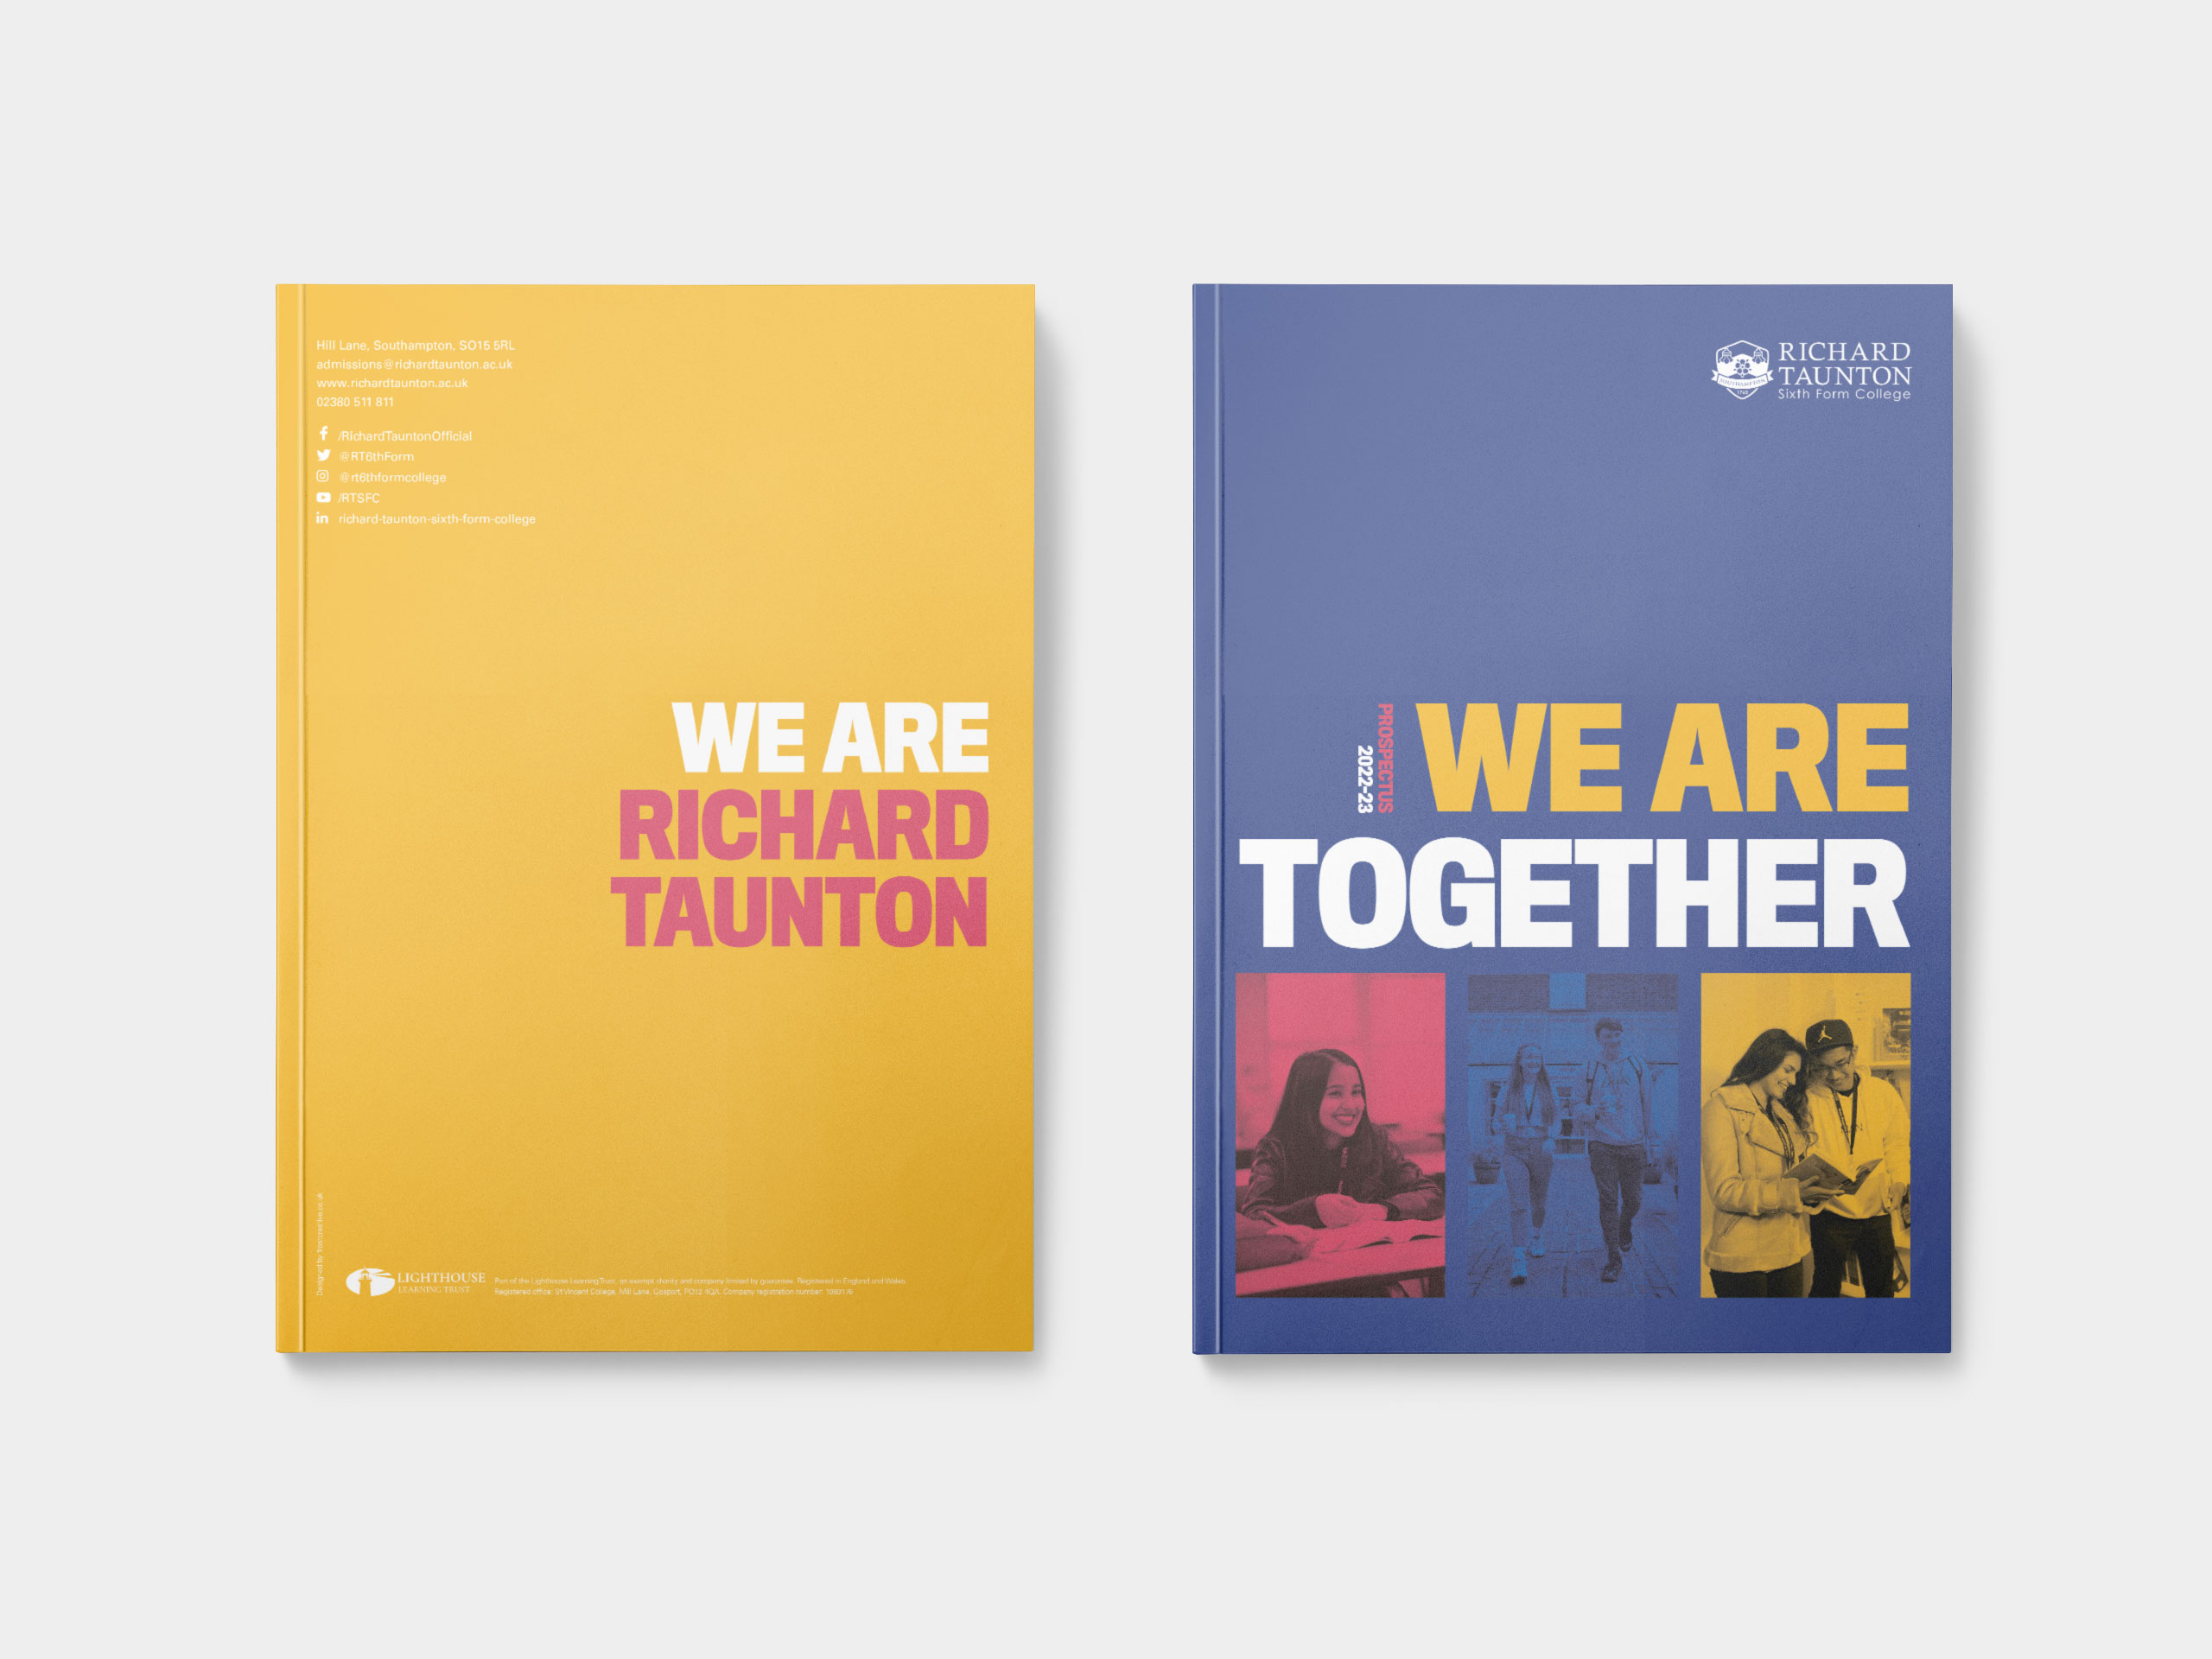 Two branded prospectus covers for a sixth form education setting.